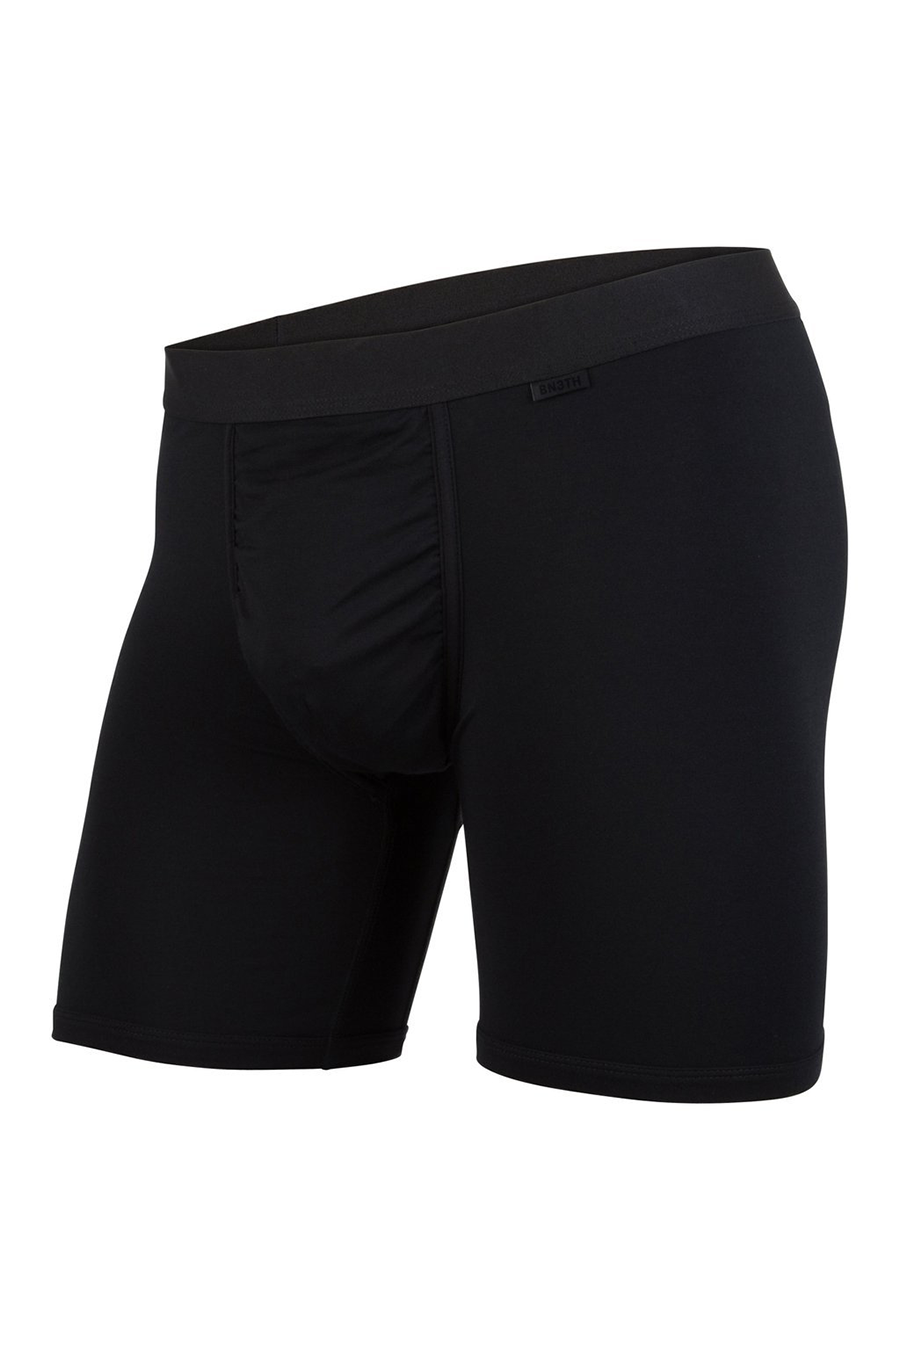 Classic Boxer Brief | Solid Black - West of Camden - Main Image Number 3 of 5